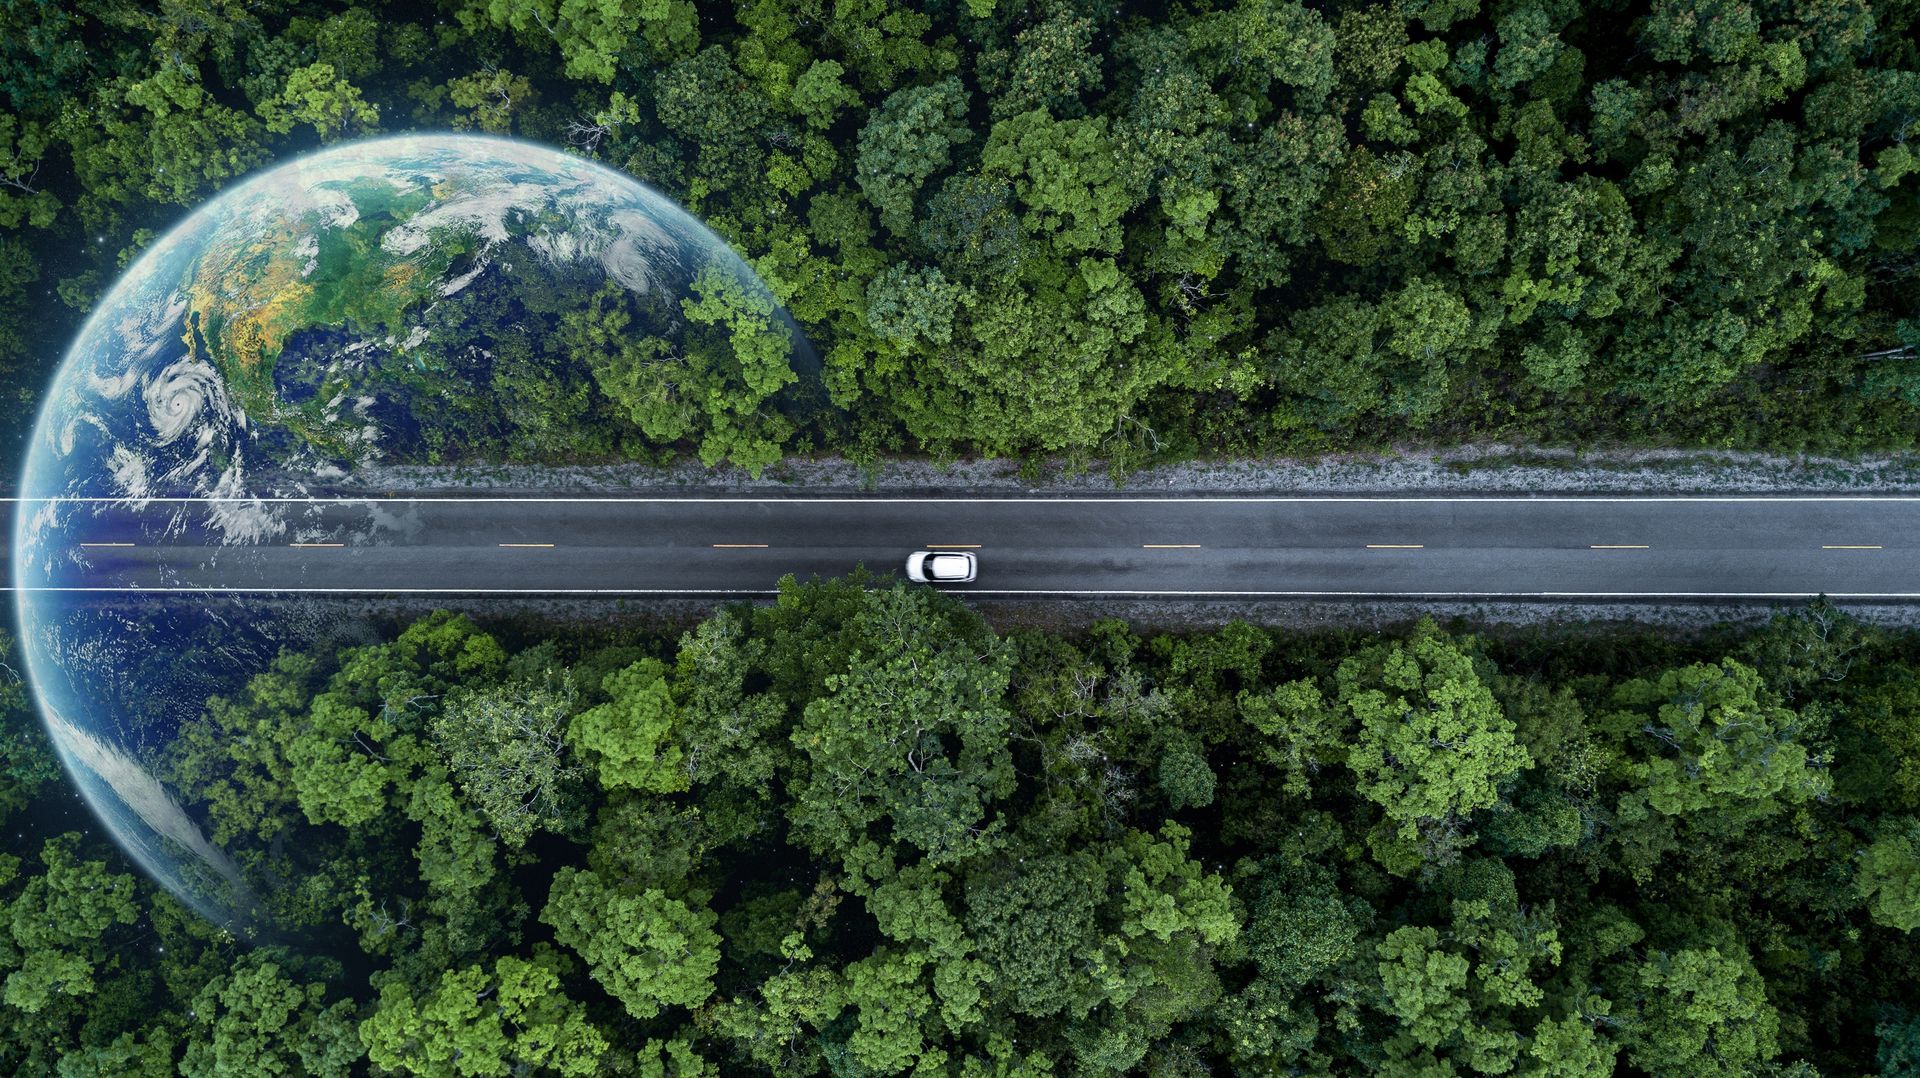 An aerial view of a road going through a forest with a globe in the middle.